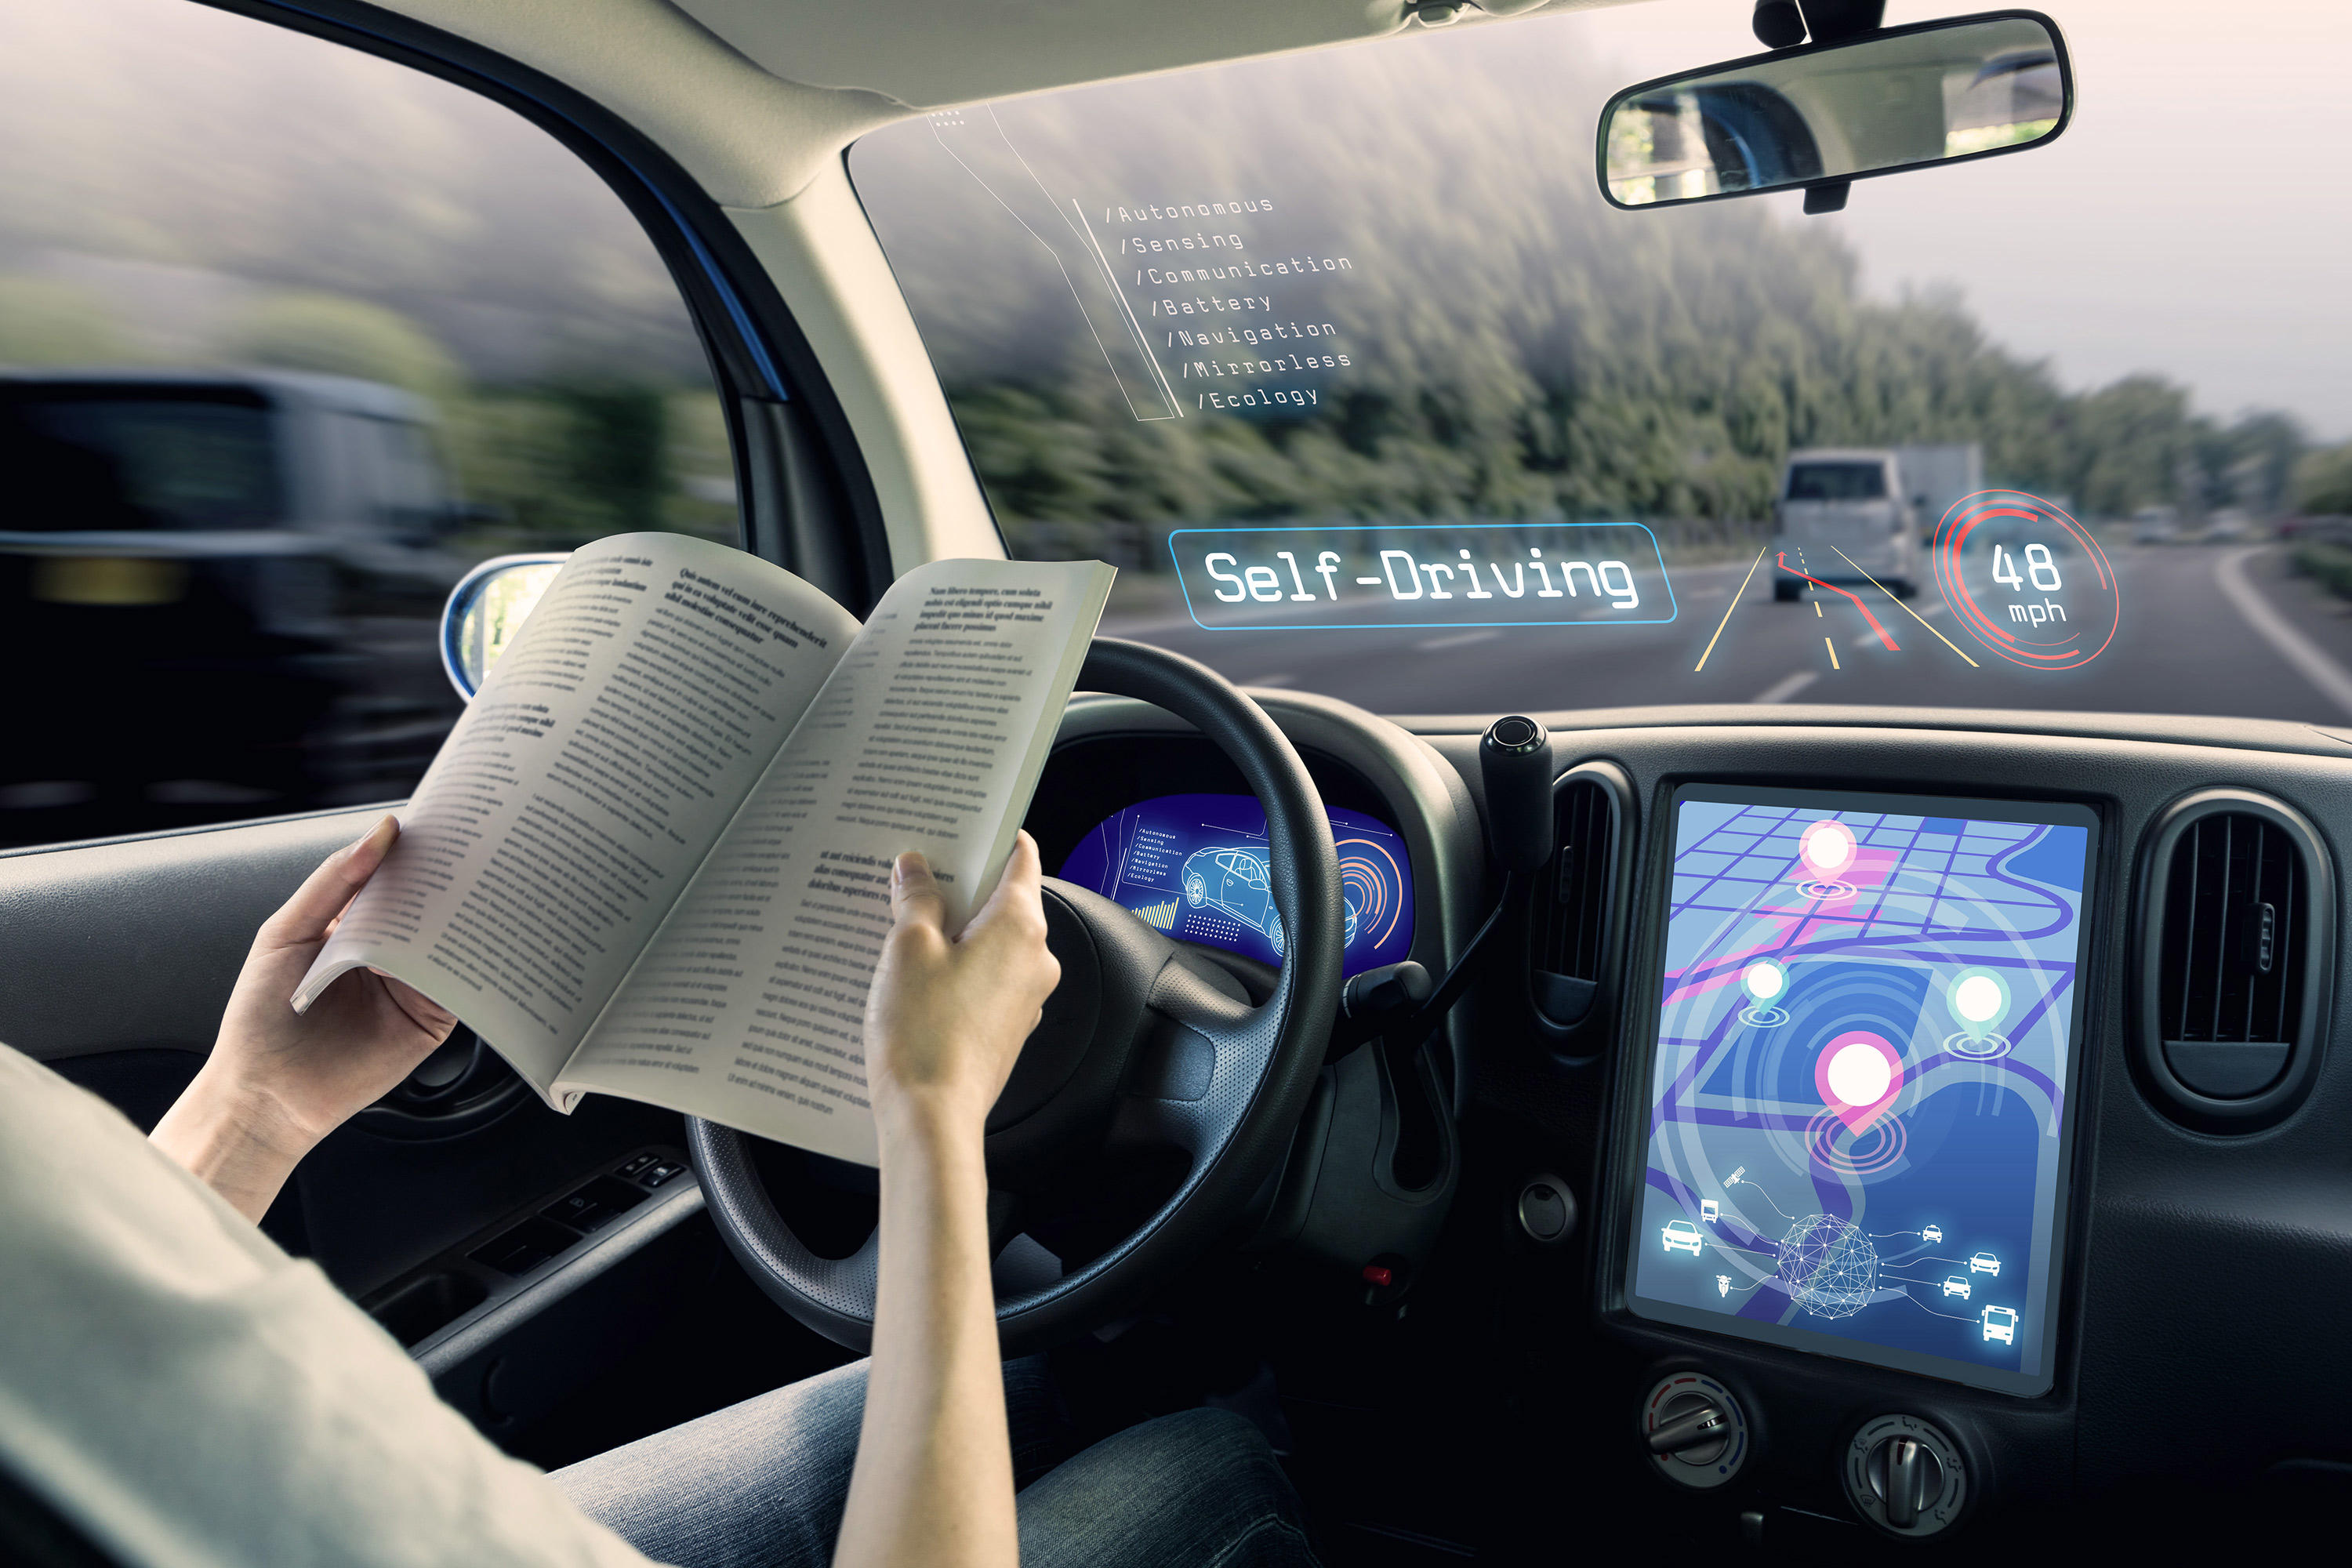 Interior of self-driving car with person reading while at the steering wheel